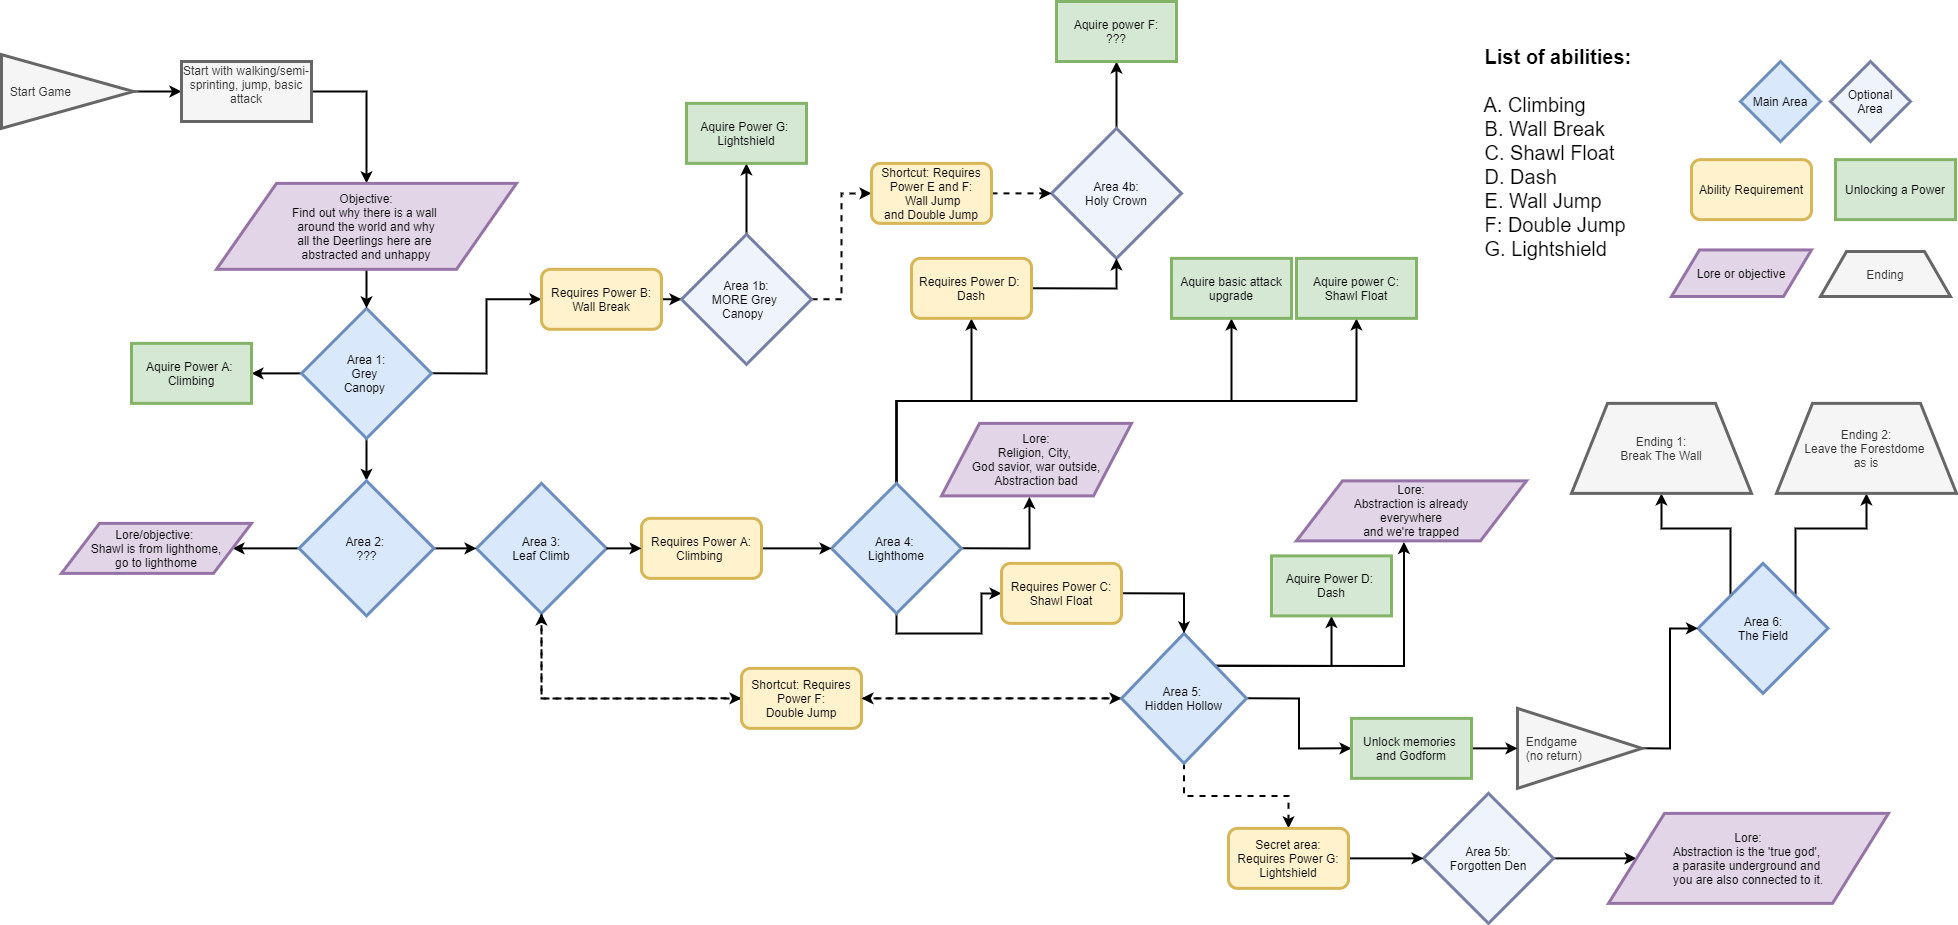 Flowchart about the game-flow.